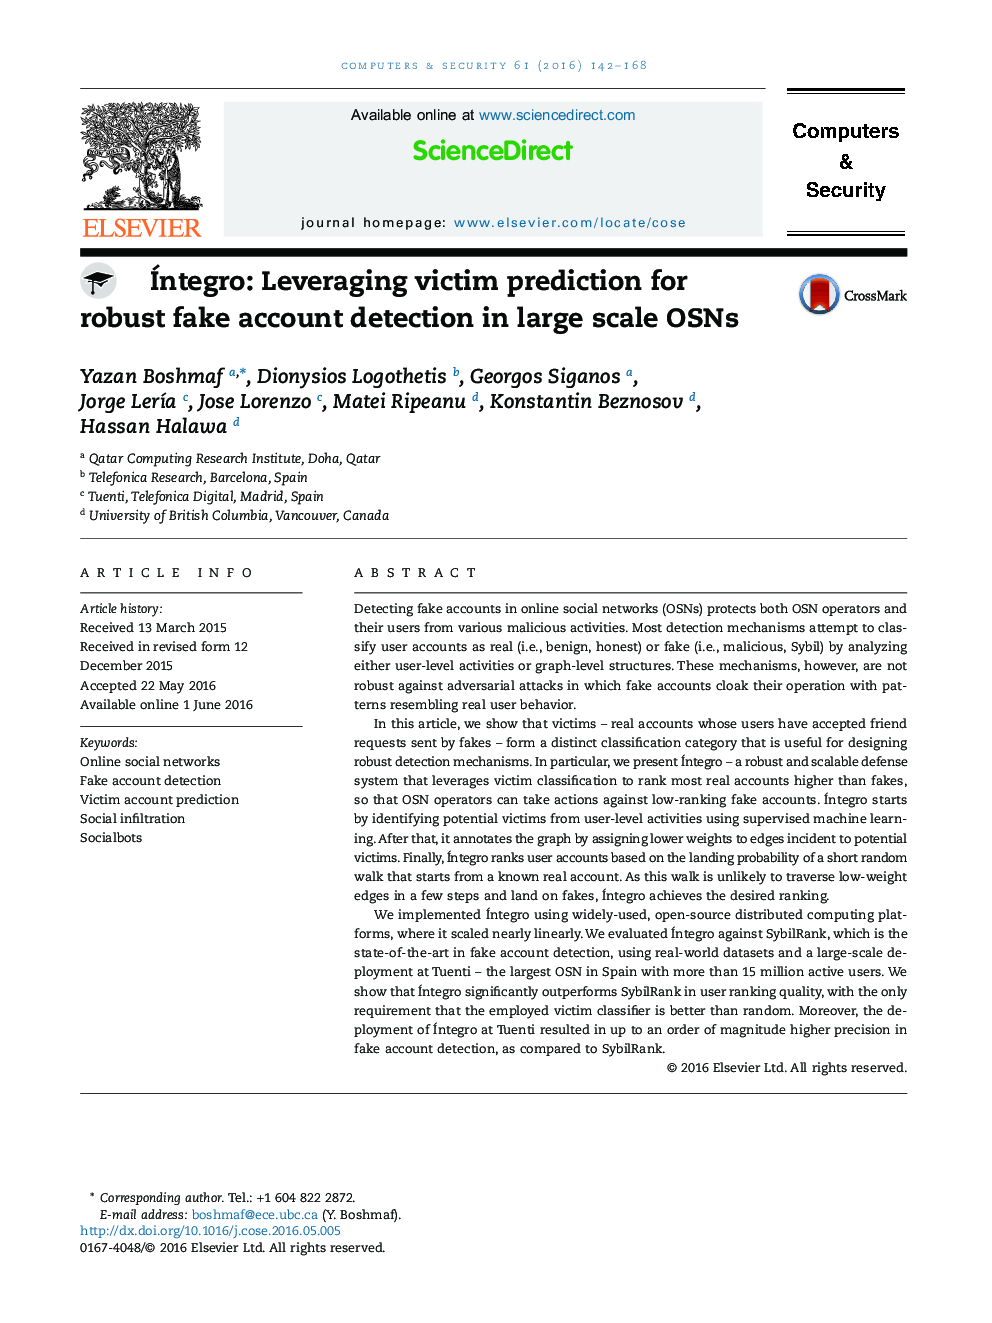 Íntegro: Leveraging victim prediction for robust fake account detection in large scale OSNs